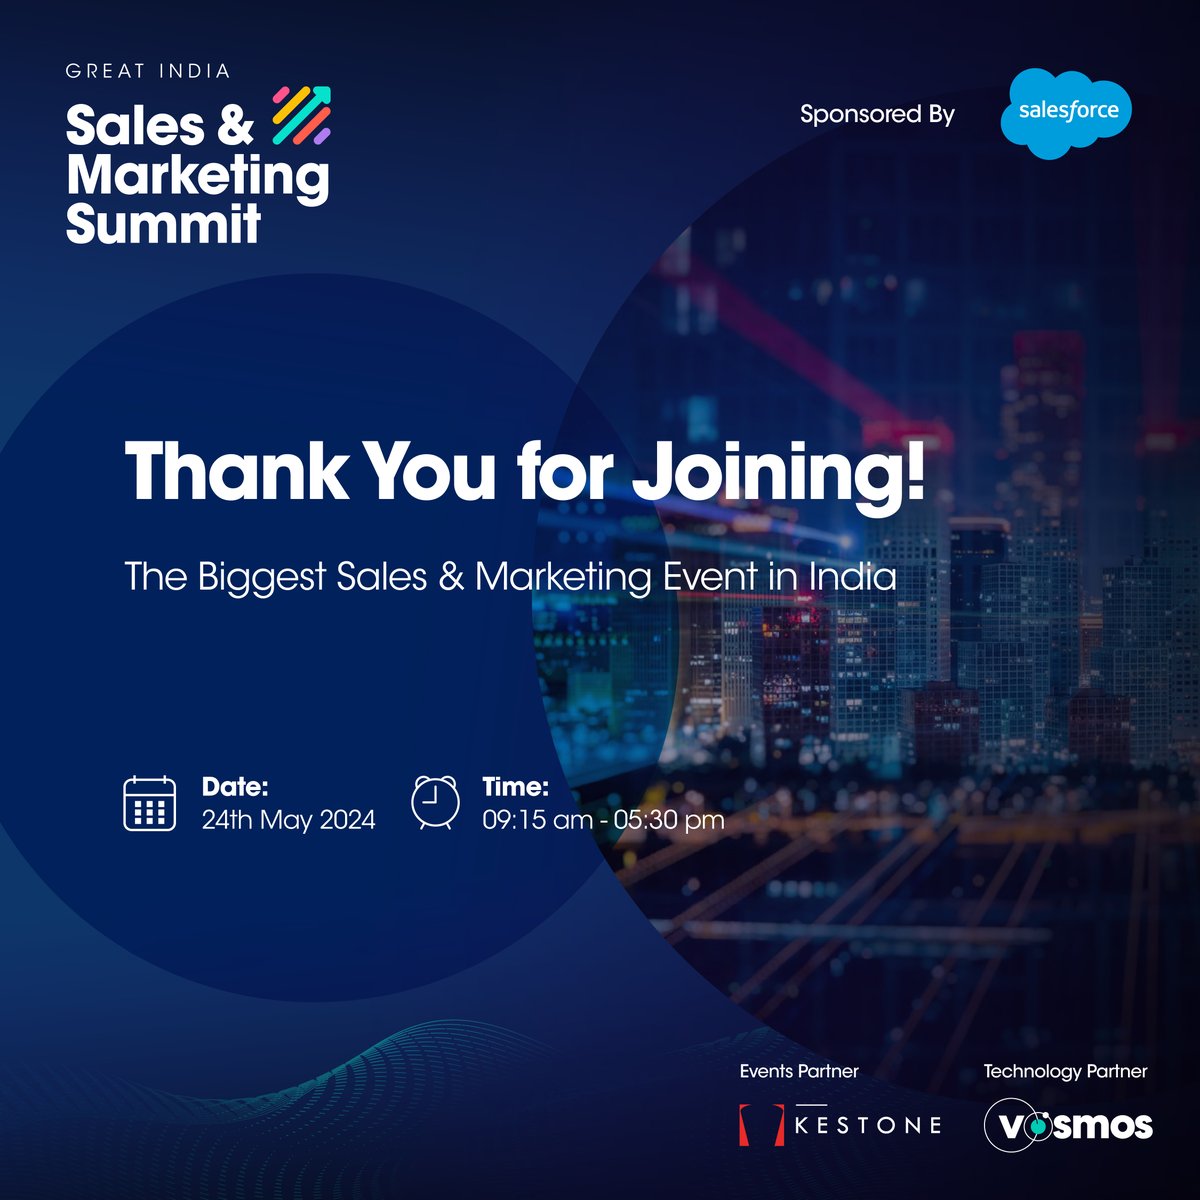 Thank you to all the incredible attendees who joined us at the Great India Sales & Marketing Summit 2024, the biggest sales and marketing event in India! Visit greatindiasummit.com for more! #Salesforce #GISMS2024 #ThankYou #SalesAndMarketing #Networking #IndustryLeaders